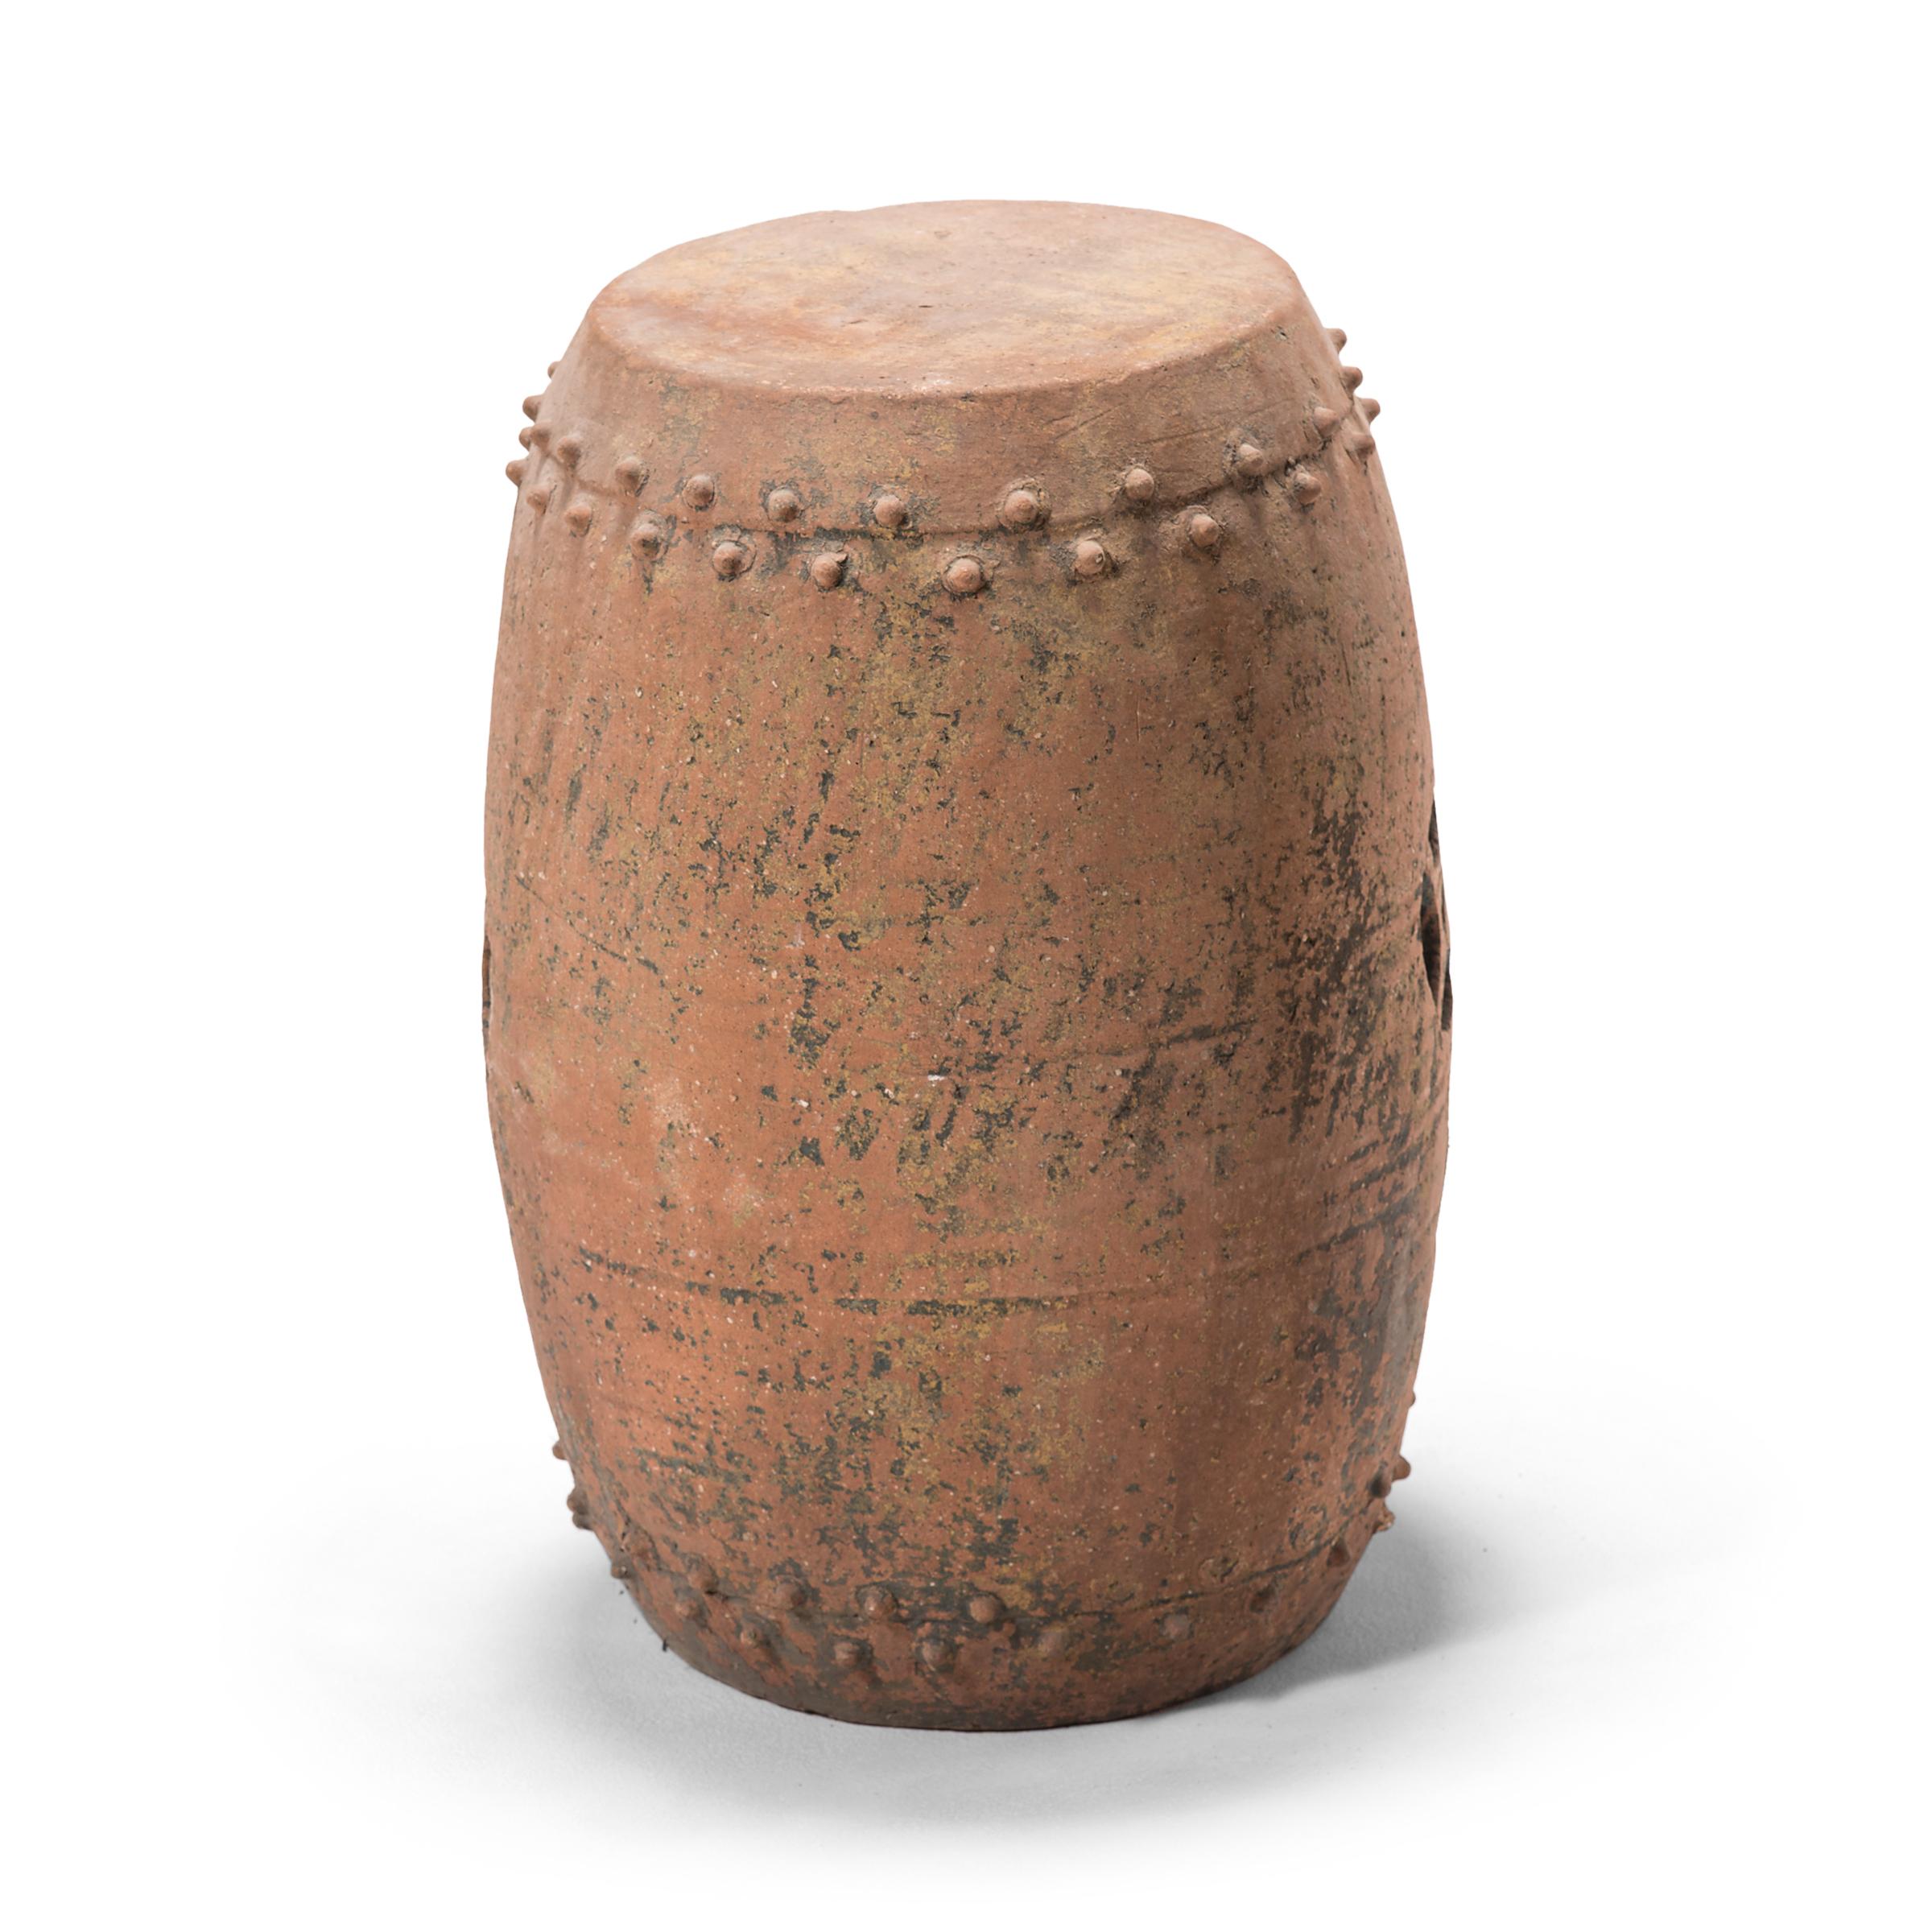 This early 20th century terracotta garden stool was created in Pingyao, an ancient, respected city in China's Shanxi province. With a history dating as far back as circa 800 B.C., Pingyao is widely known for its well-preserved Ming- and Qing-dynasty